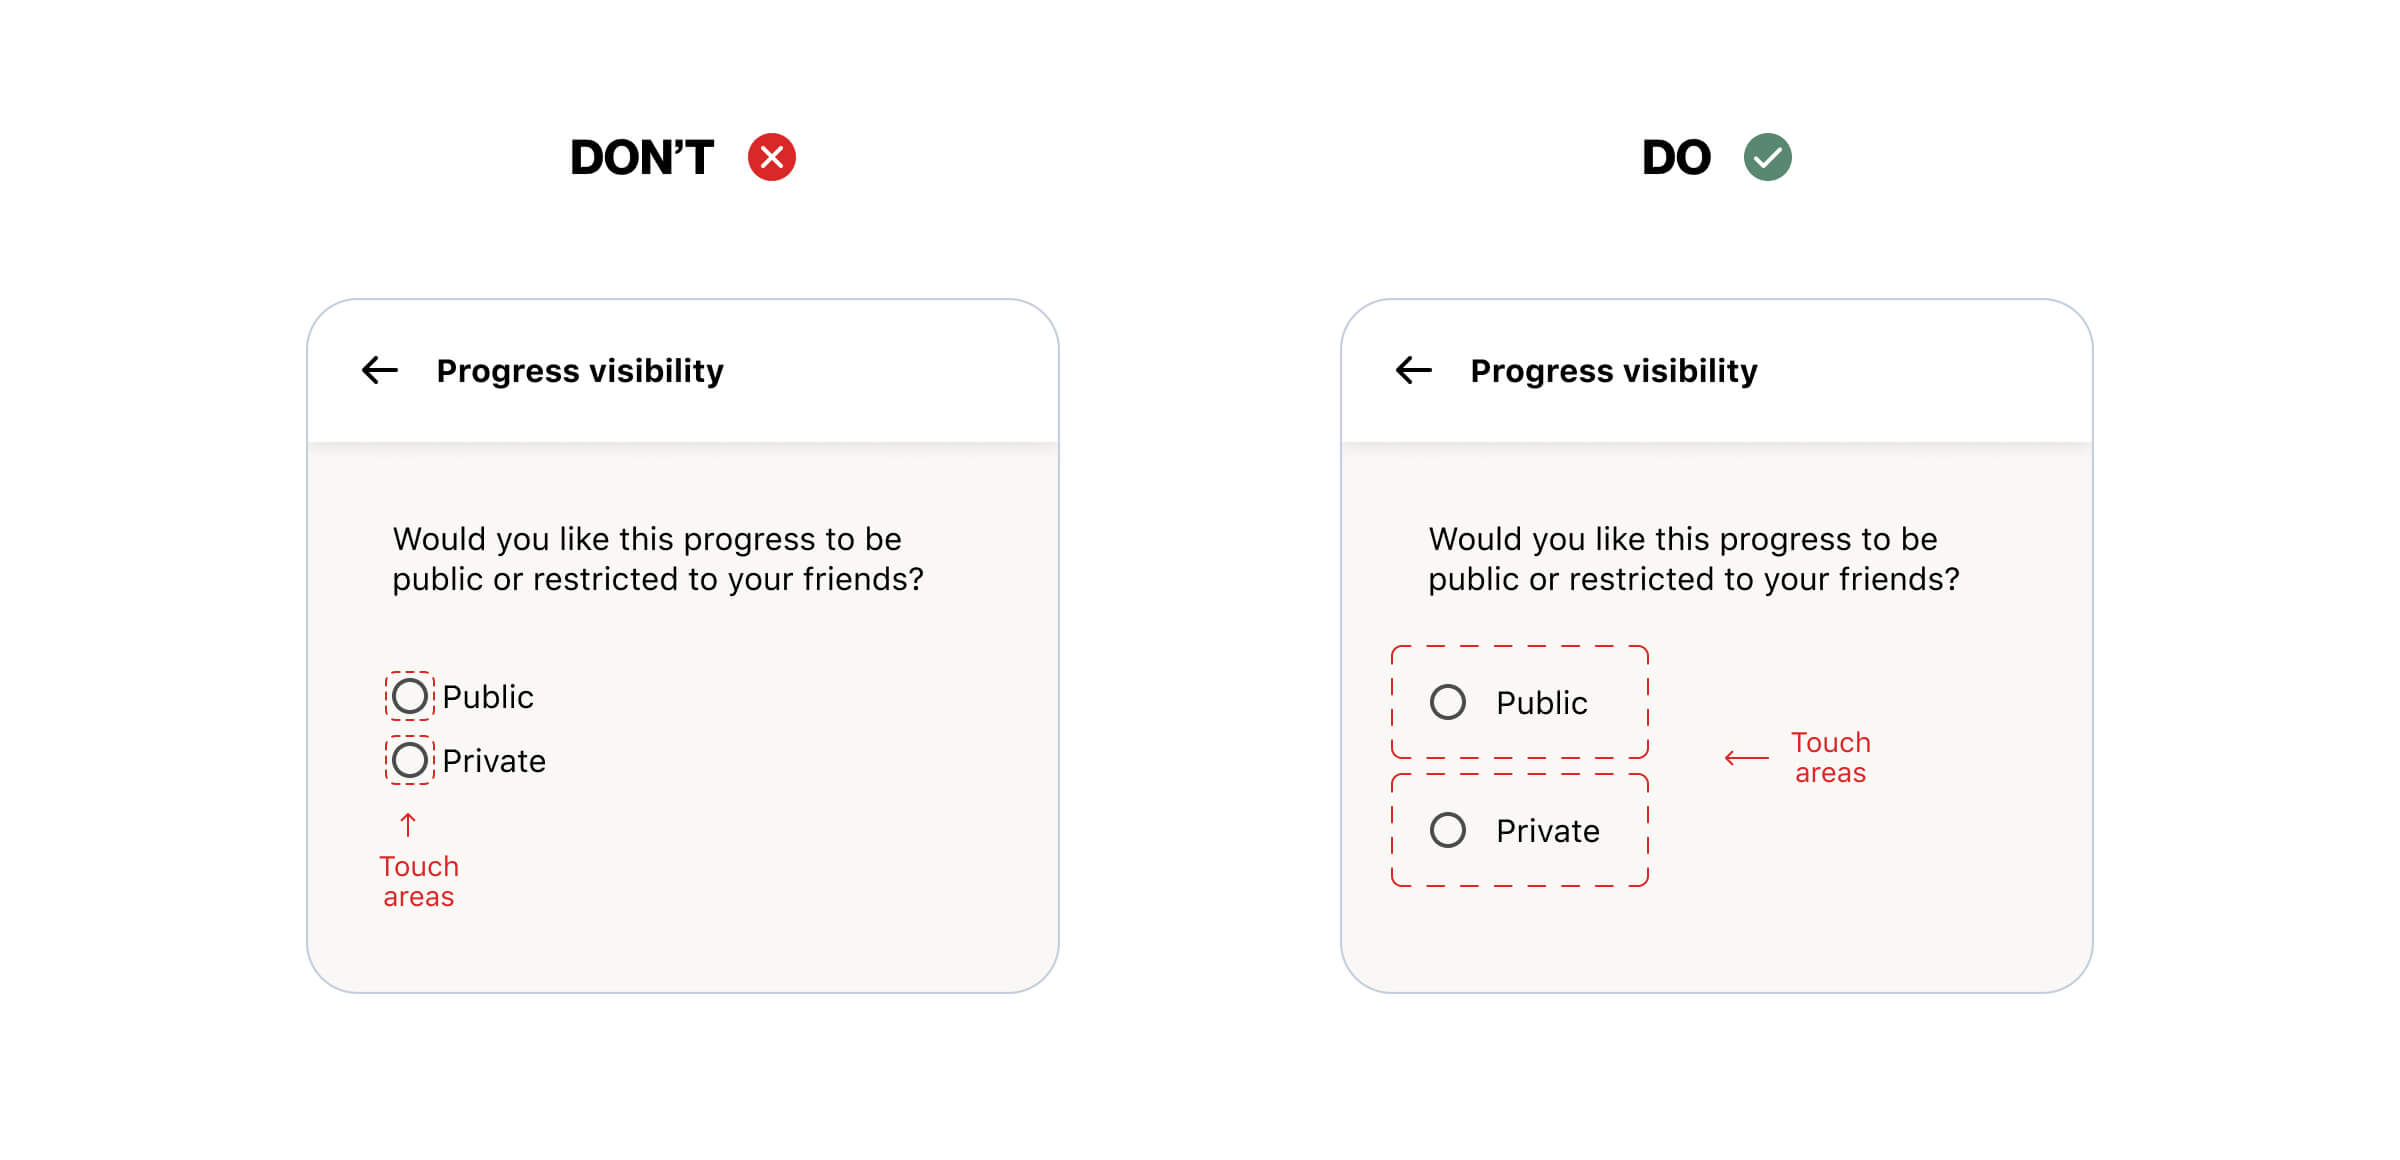 The image shows two mobile displays showing two visibility options for the user to choose: public and private. On the first, labeled ‘Don’t’, the touch target areas for choosing either public or private visibility are very small and very close together: it is likely that in attempting to press one, the user would accidentally press the other. On the second screen, labeled ‘Do’, the touch target areas for choosing either public or private visibility are much larger and are spaced further from each other. In the second example, it is less likely that in trying to press one option, the user would accidentally press the other.